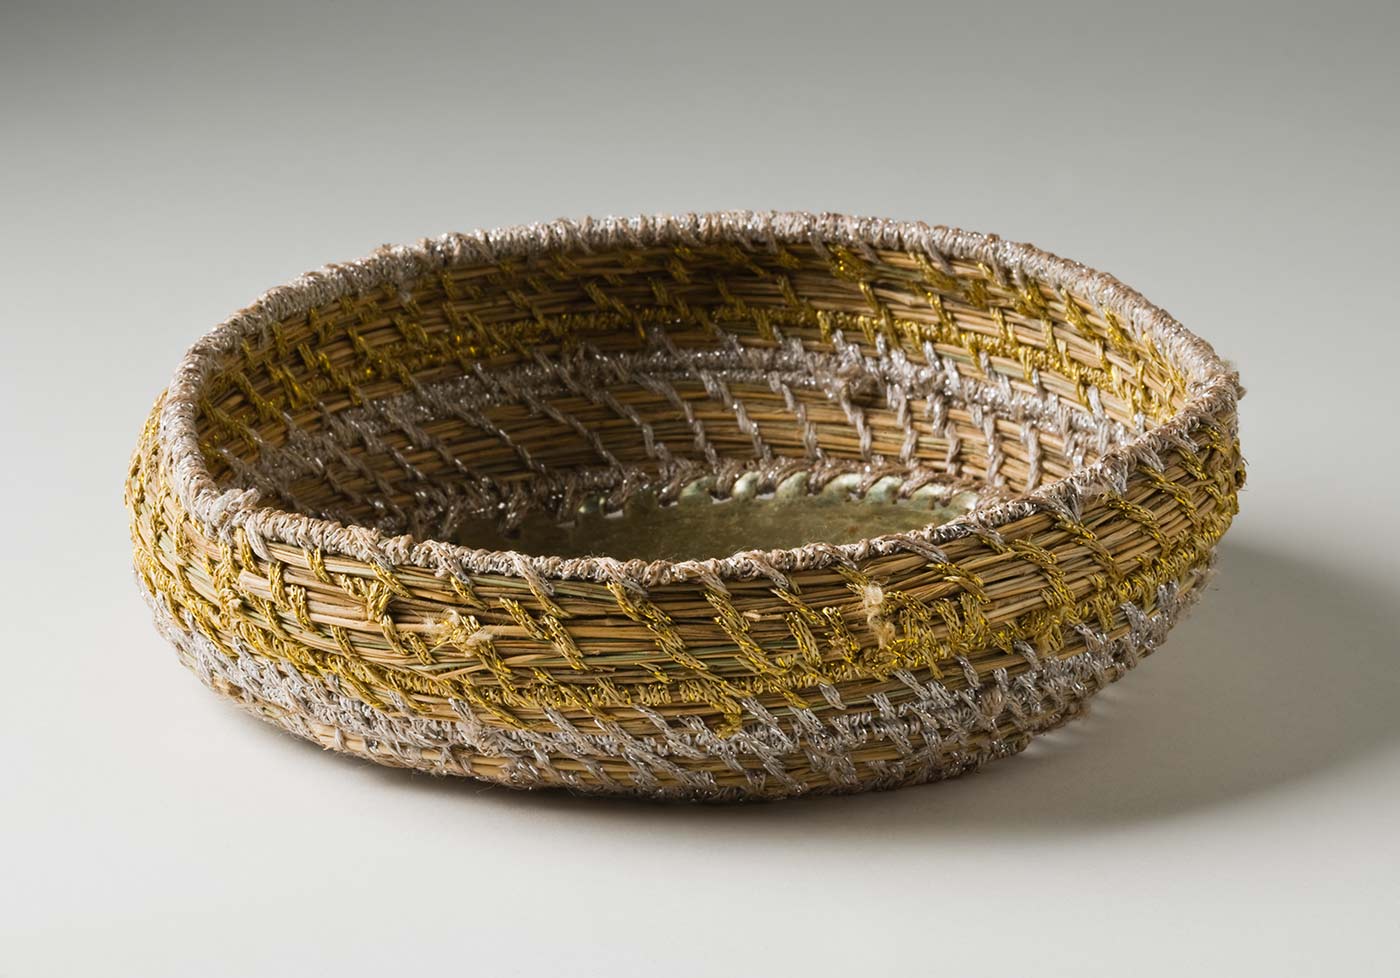 A shallow circular metallic yarn and plant fibre basket with metal base. The base is made of a blue 'Fray Bento / Steak and Kidney Pie' tin lid which has been attached to the yarn section with silver coloured metallic yarn through holes punched in the tin. The basket has silver and gold coloured metallic yarn spaced out so the plant fibre centre can be seen. - click to view larger image